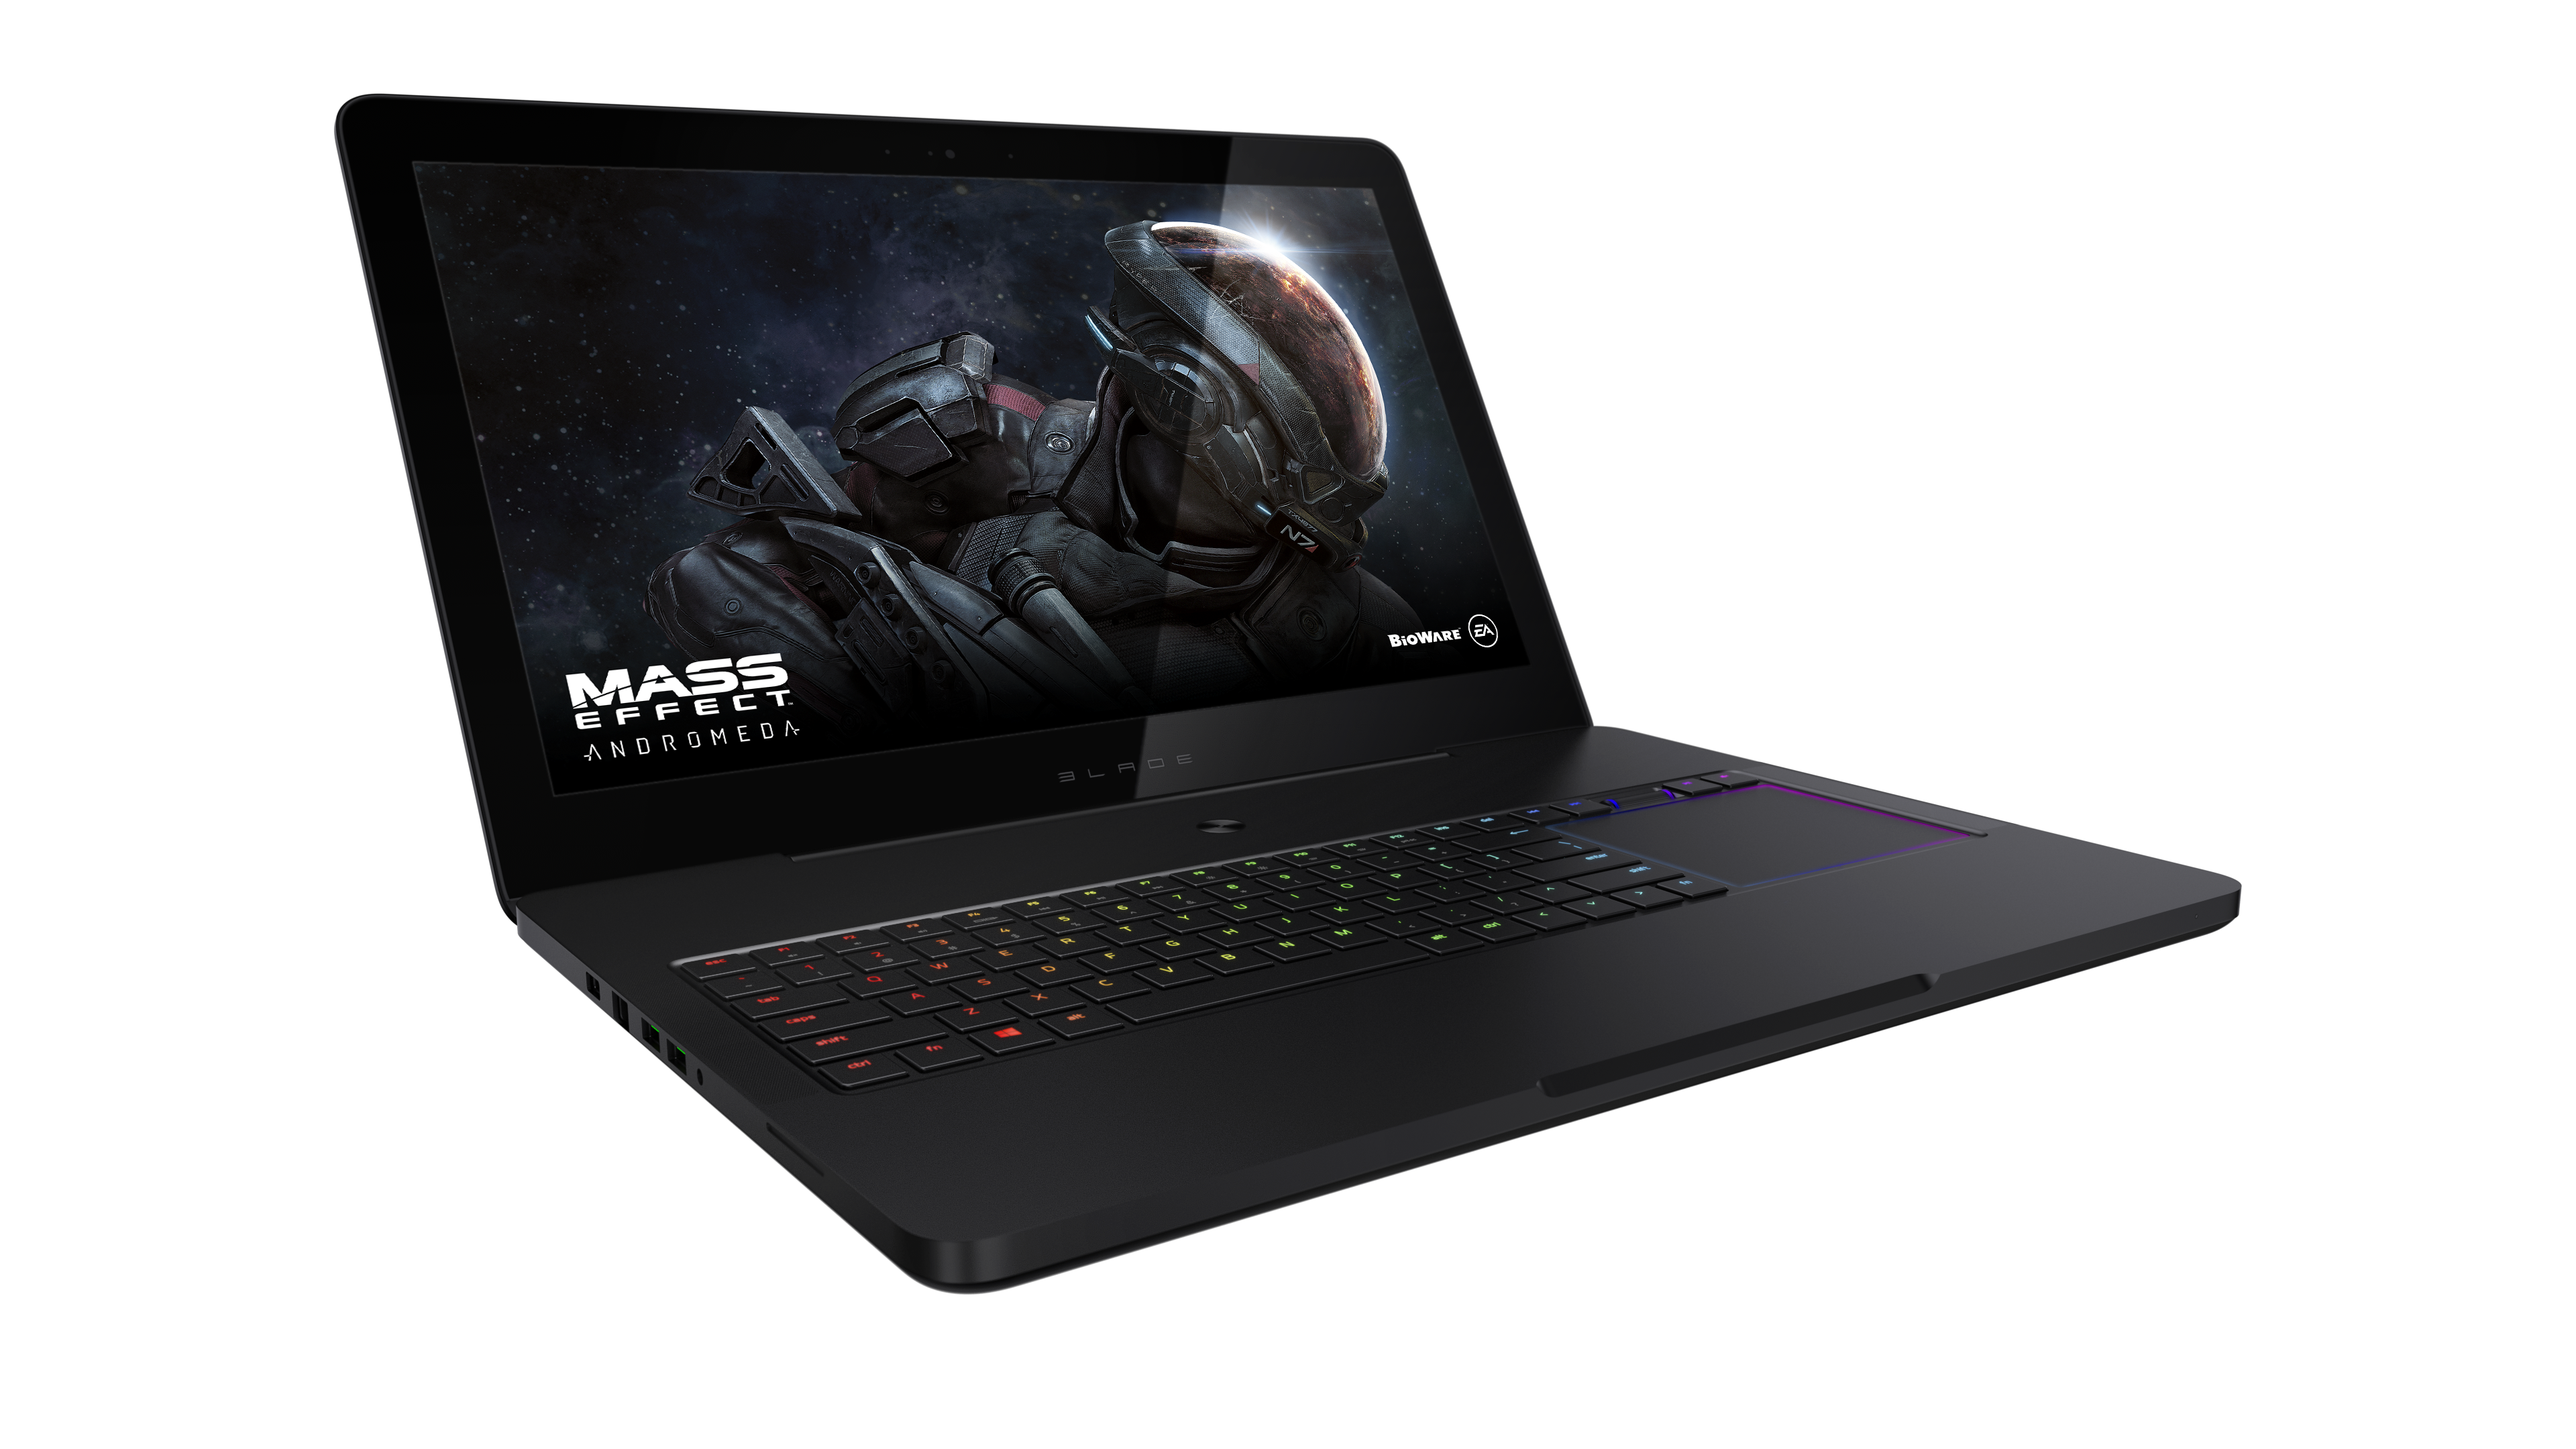 Razer launches the first THX Certified laptop with the ‘Razer Blade Pro’